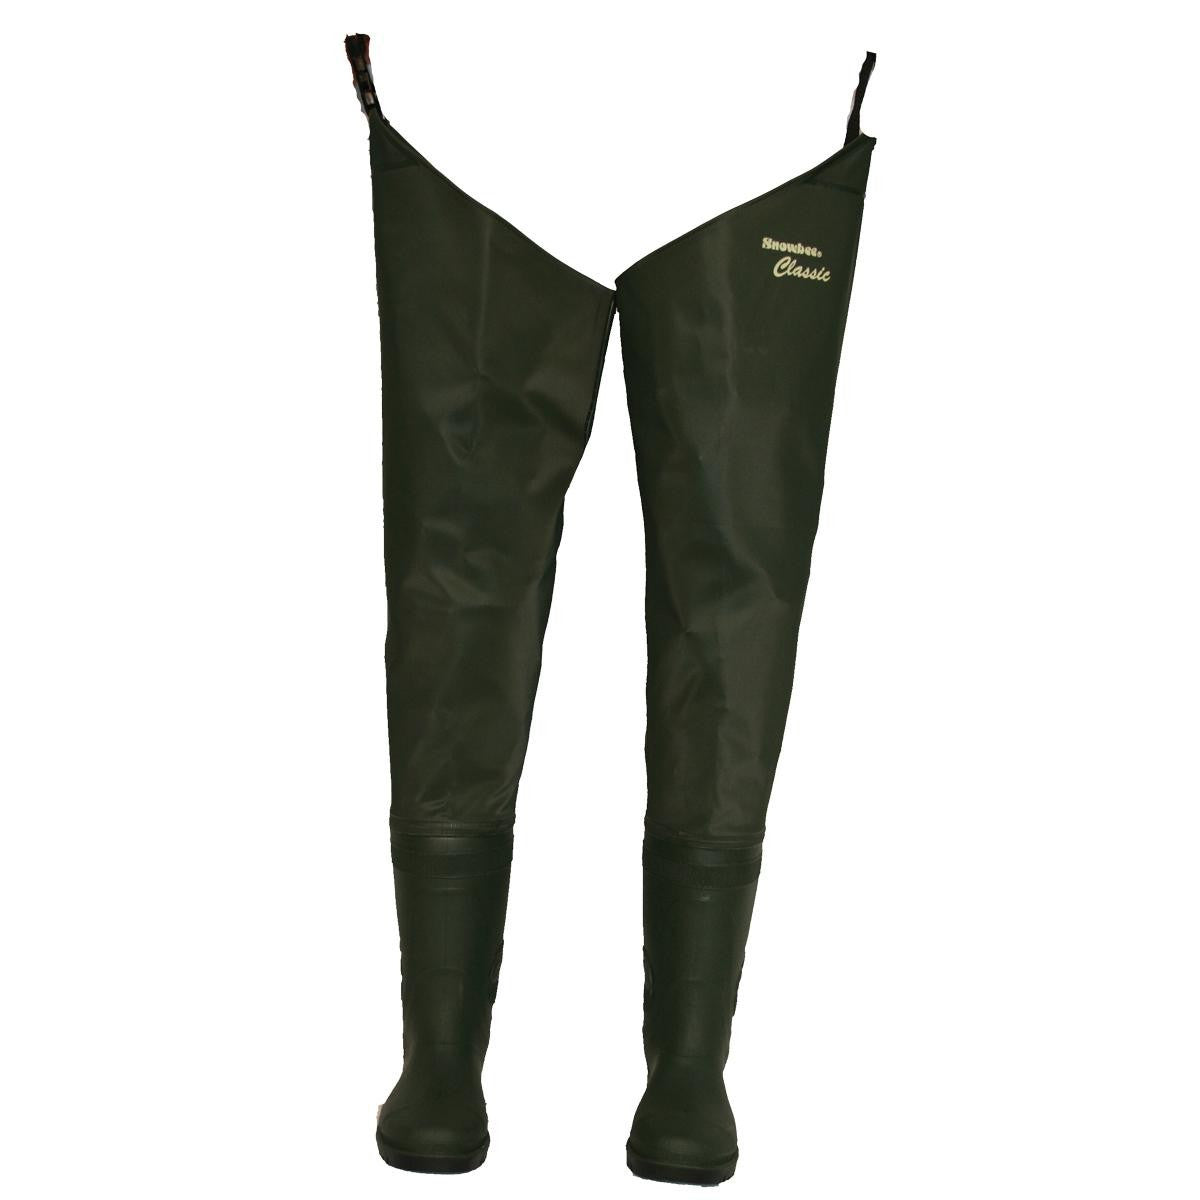 SNOWBEE PVC THIGH WADER 8 - Southern Wild